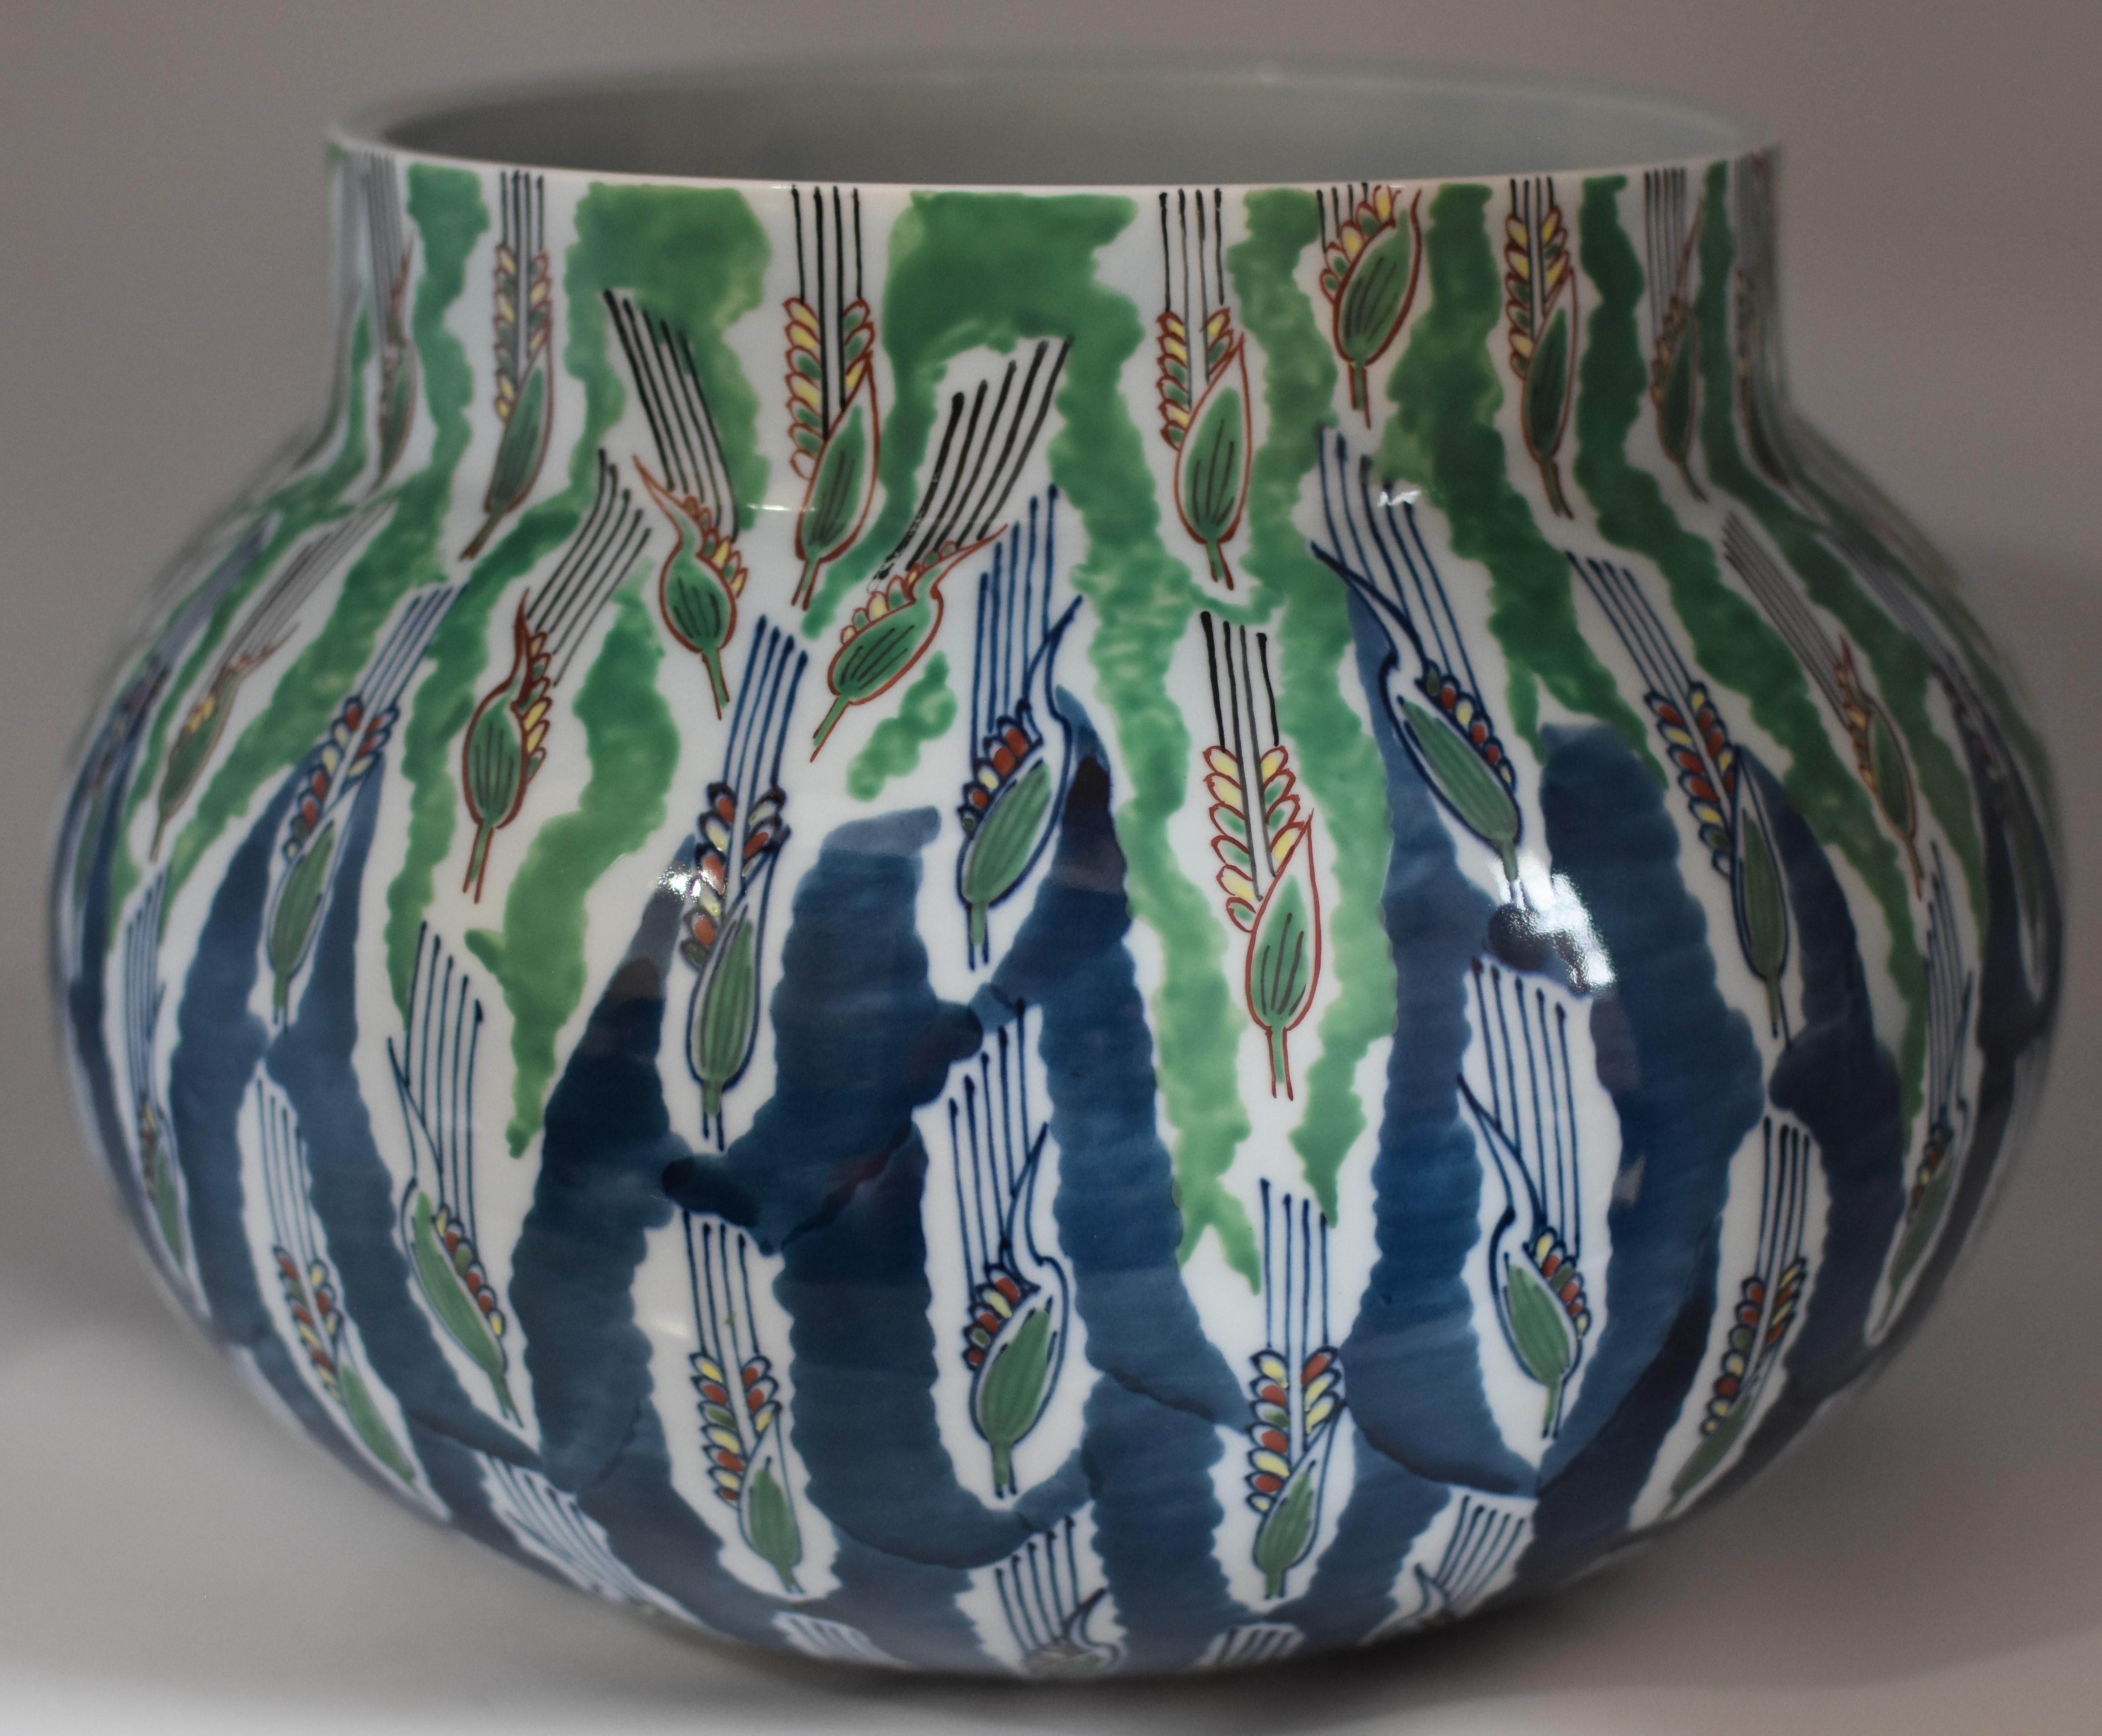 Exceptional unique very large Japanese contemporary Imari decorative porcelain vase, hand painted in lively green and blue on a stunningly shaped porcelain body – a masterpiece by a highly acclaimed award-winning master porcelain artist of the